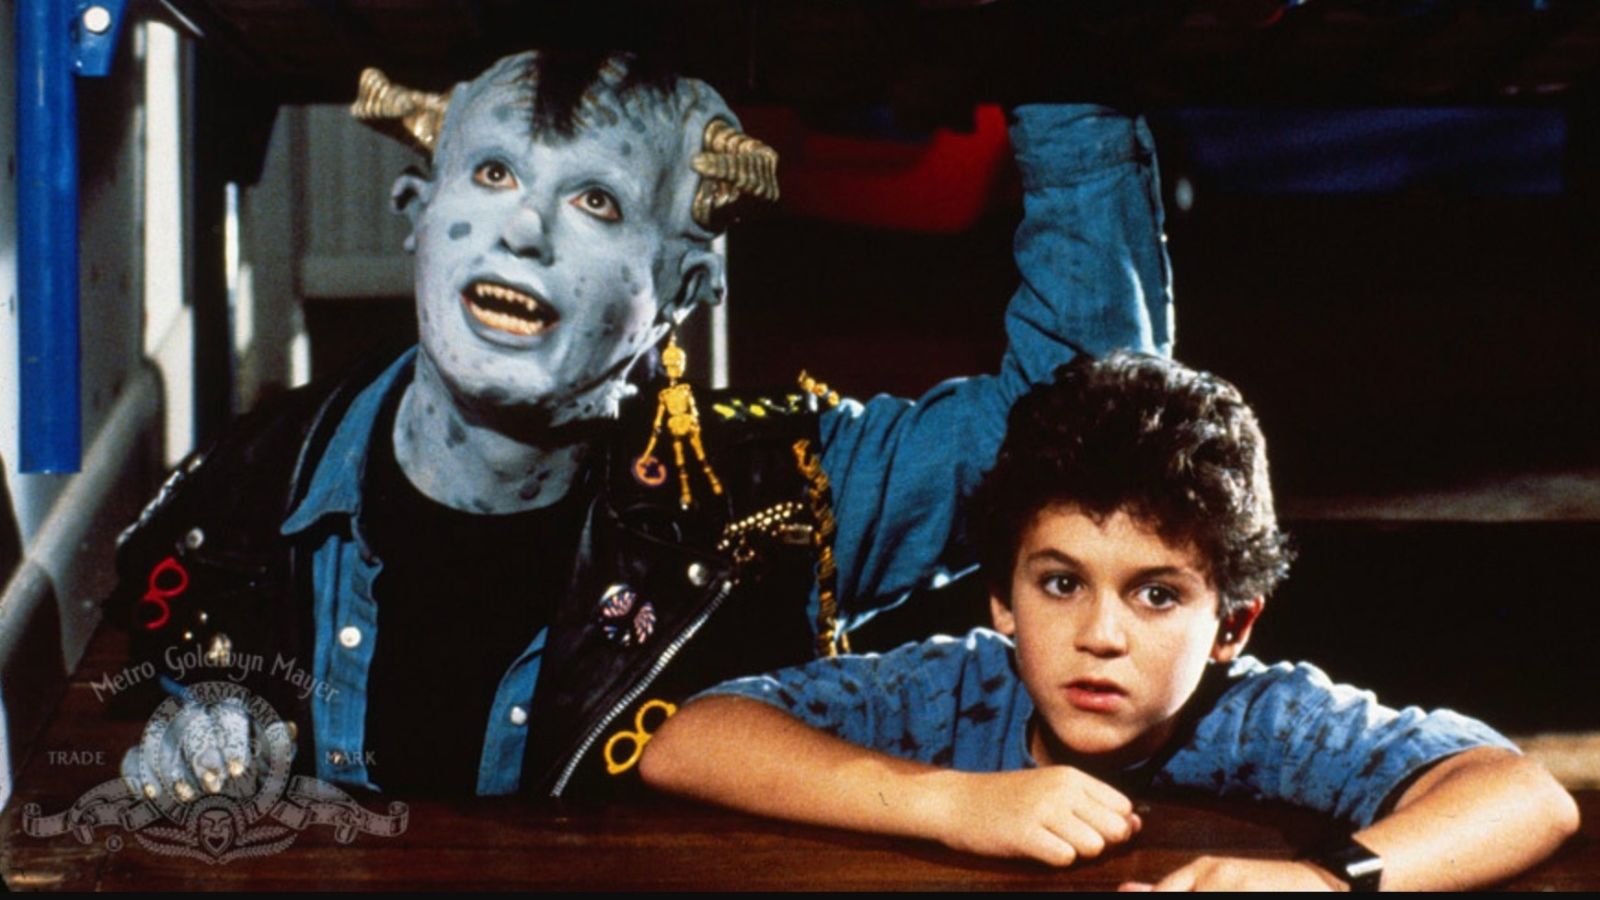 he monster Maurice (Howie Mandel) and his friend Fred Savage in Little Monsters (1989)